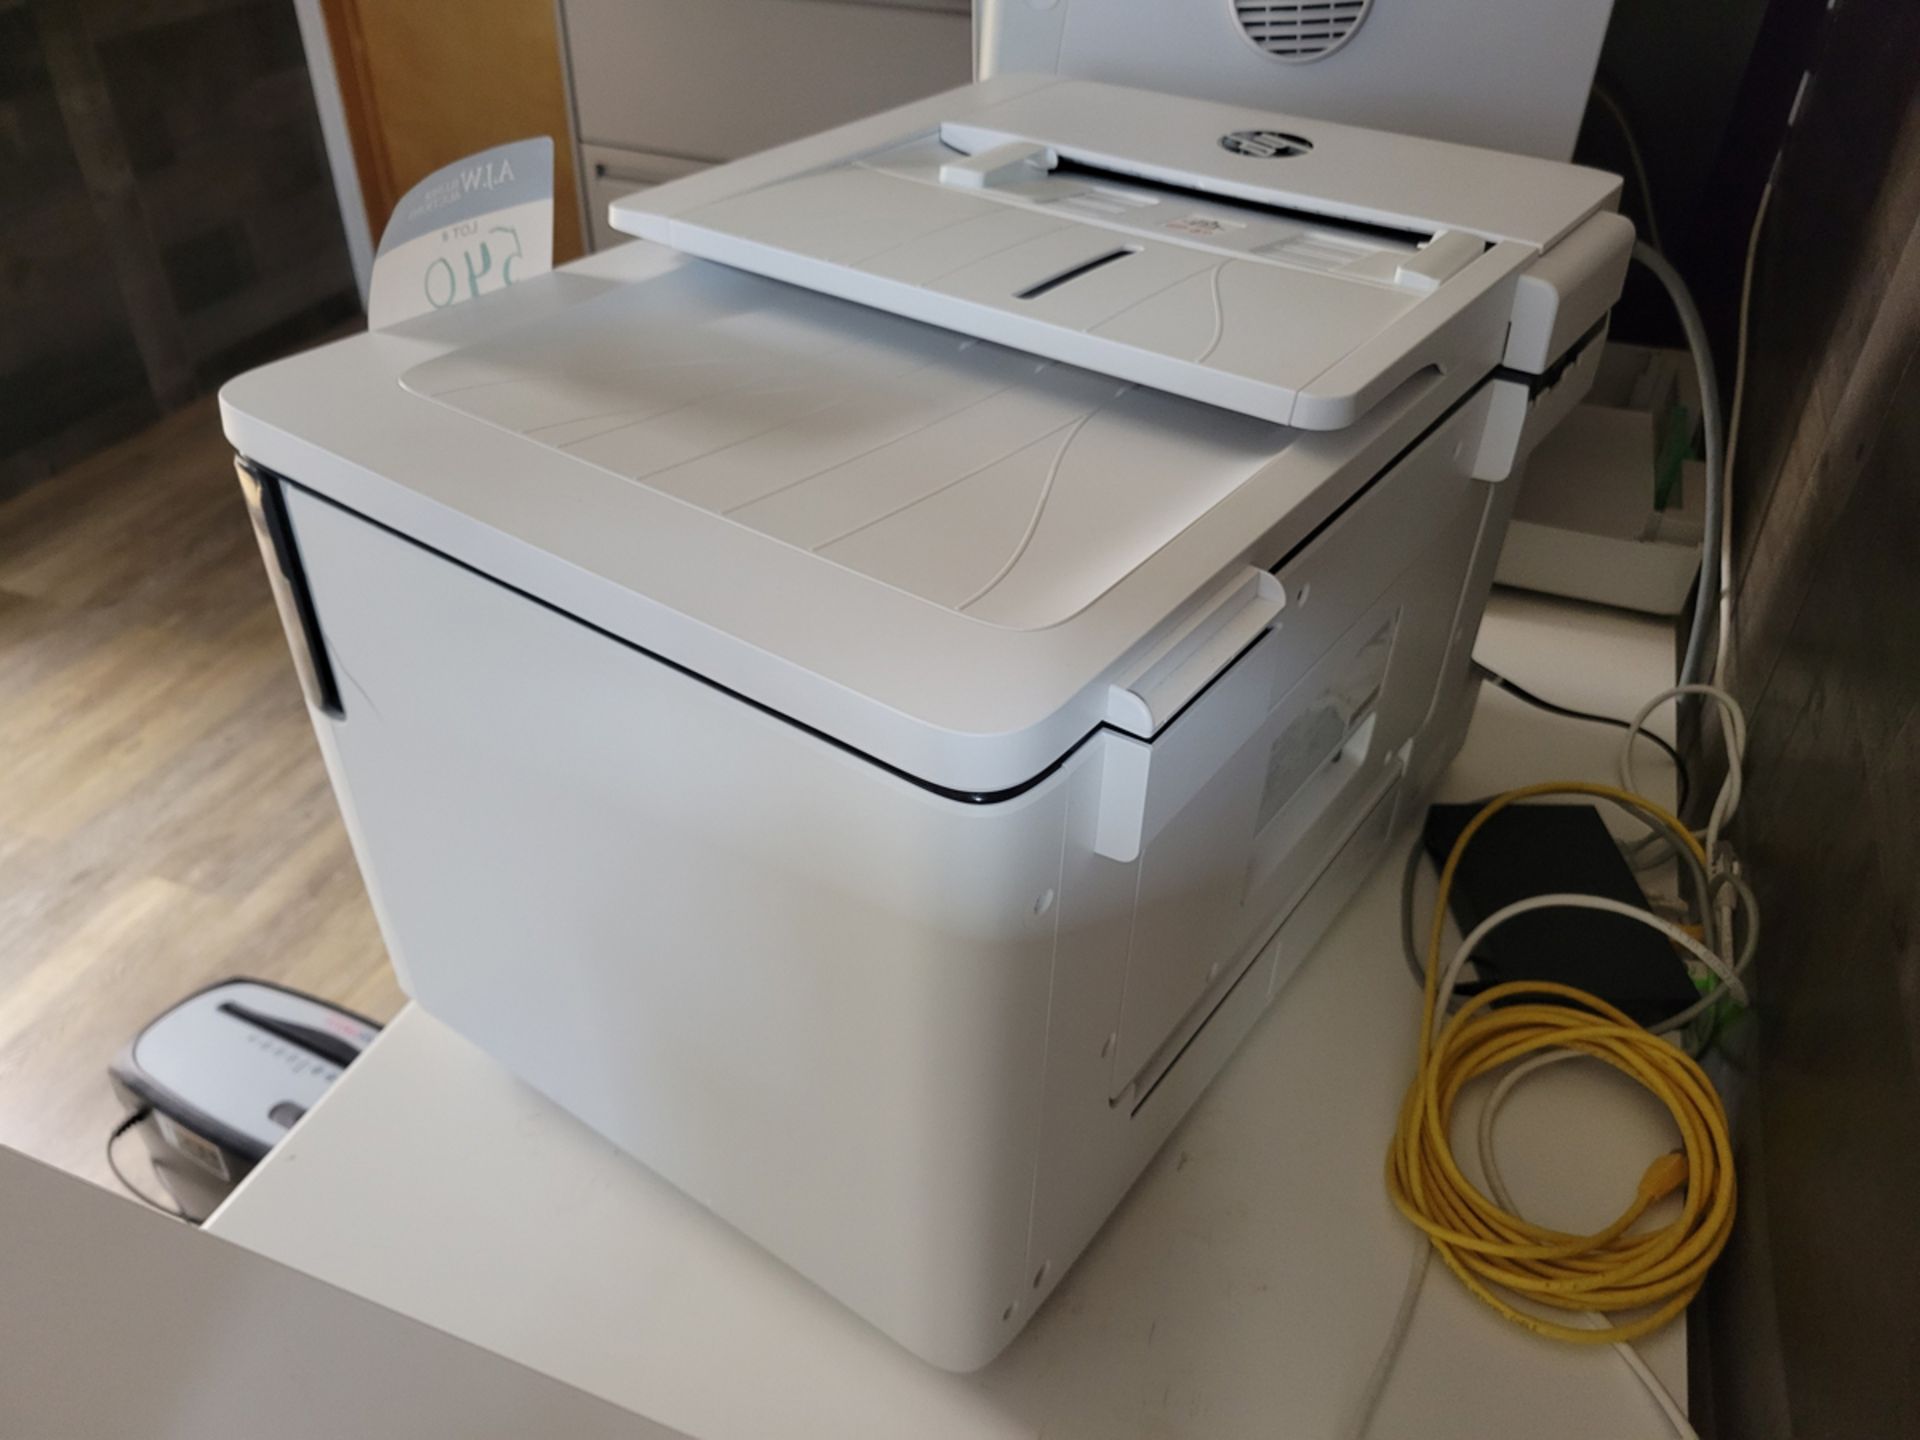 HP Office Jet Pro 7740 All In One Printer - Image 3 of 5